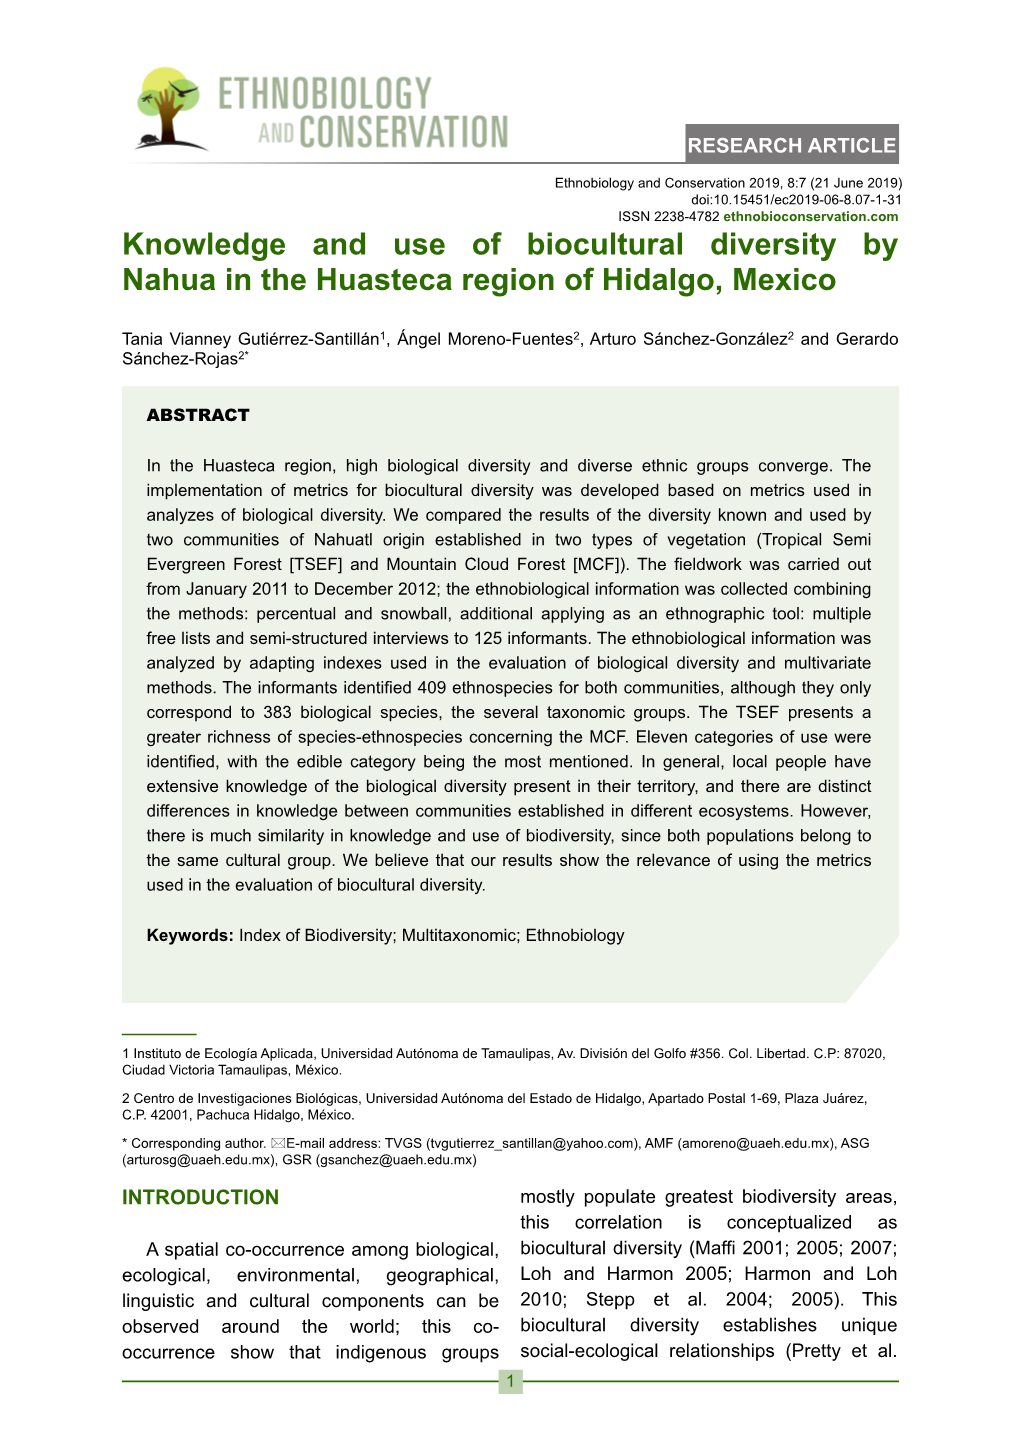 Knowledge and Use of Biocultural Diversity by Nahua in the Huasteca Region of Hidalgo, Mexico